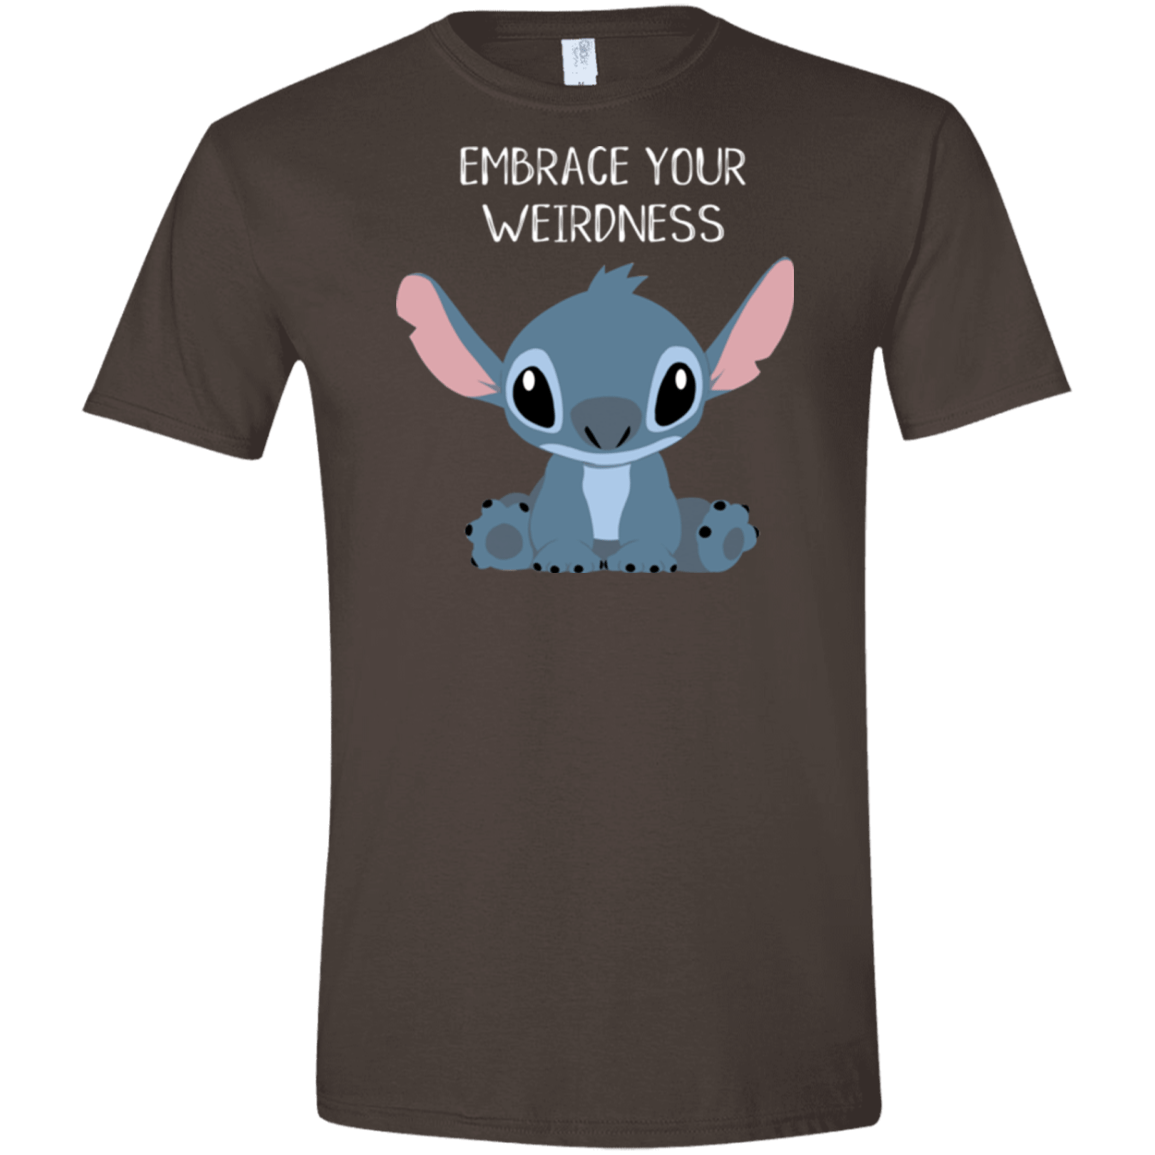 T-Shirts Dark Chocolate / S Embrace your weirdness Men's Semi-Fitted Softstyle